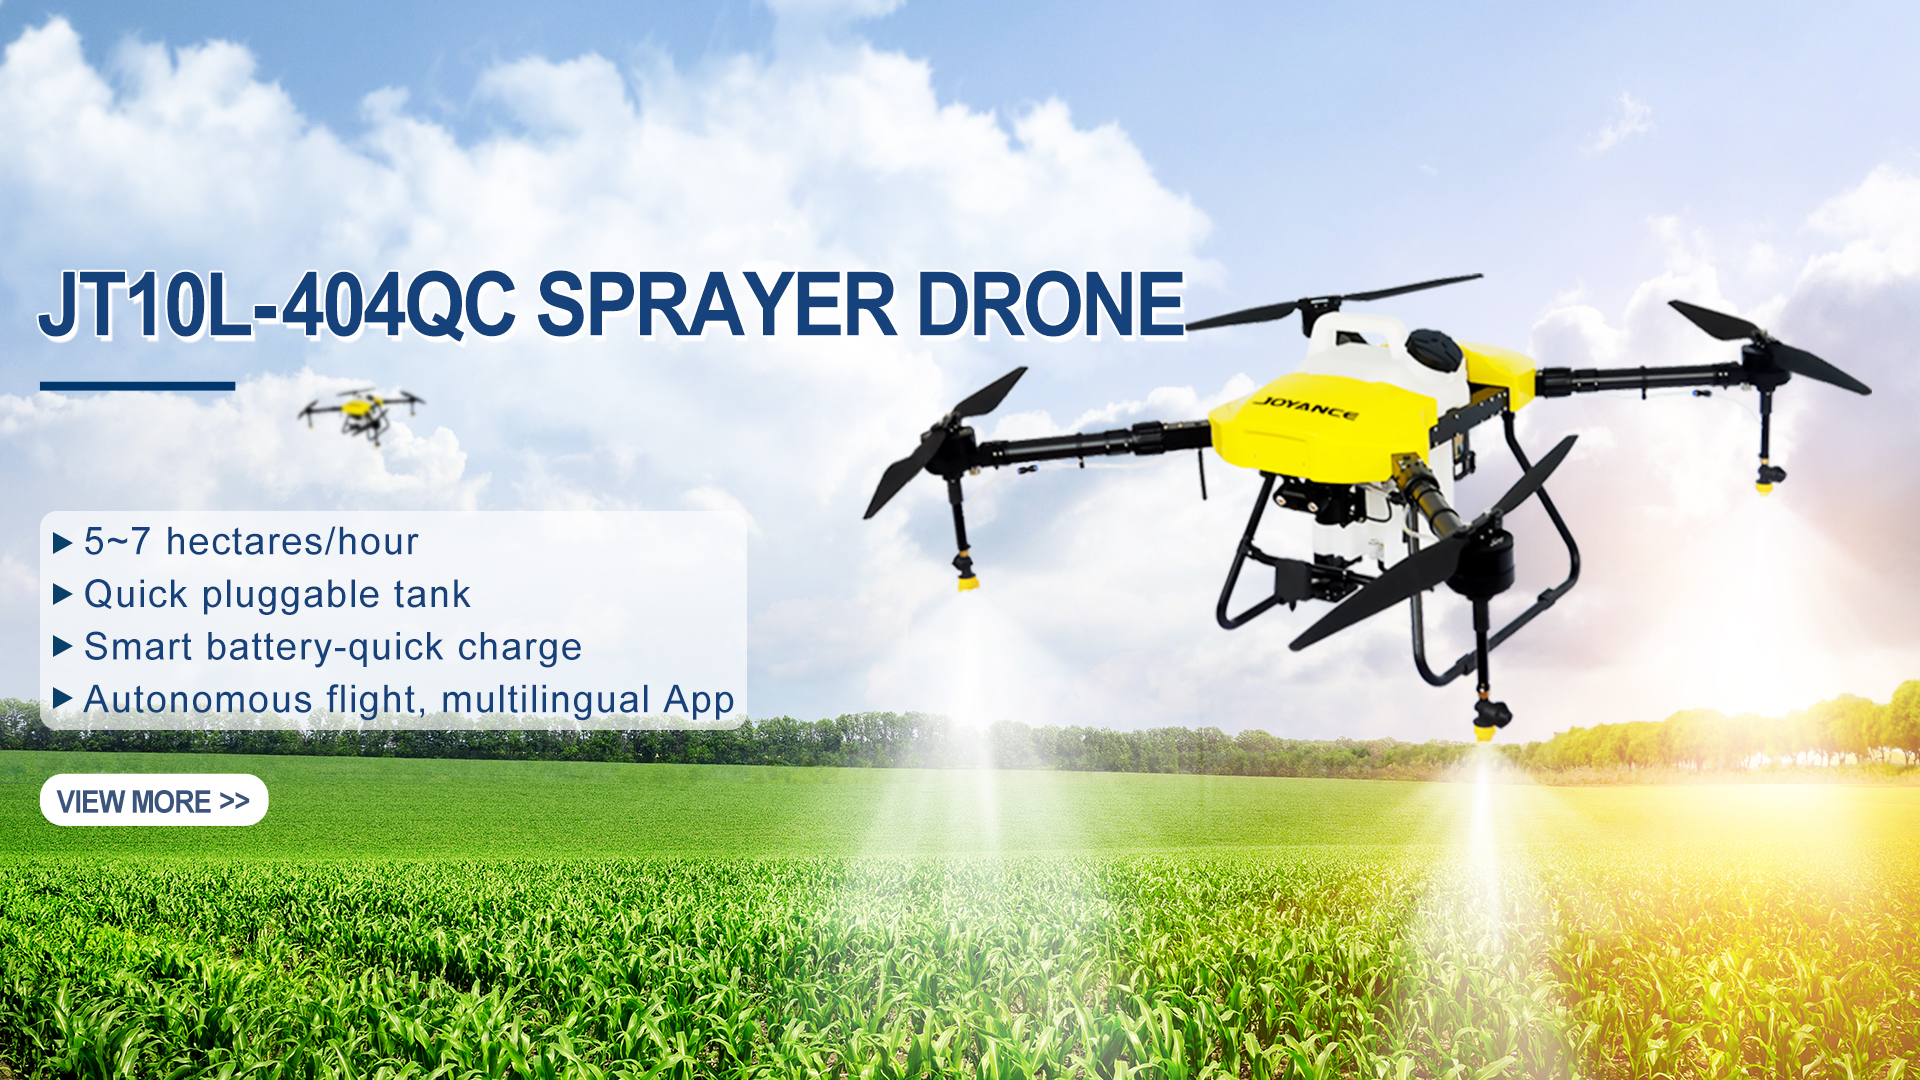 Contribute to Agriculture: Global Plant Protection Drones Attack